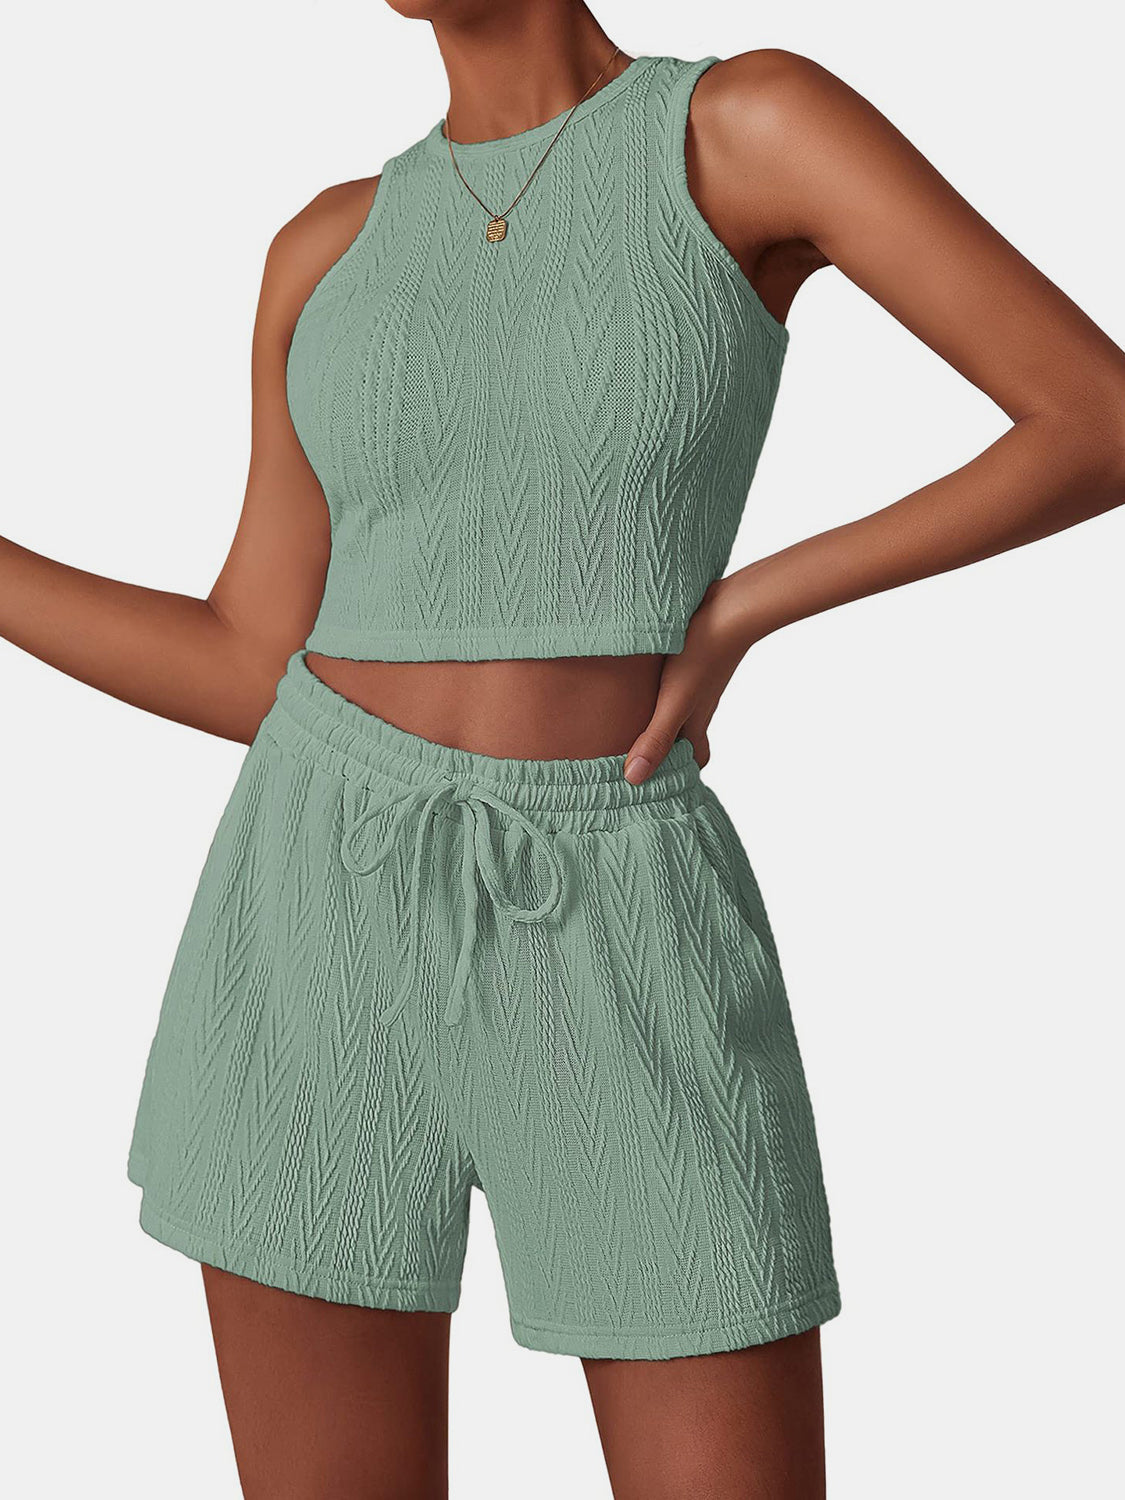 Textured Round Neck Top and Shorts Set